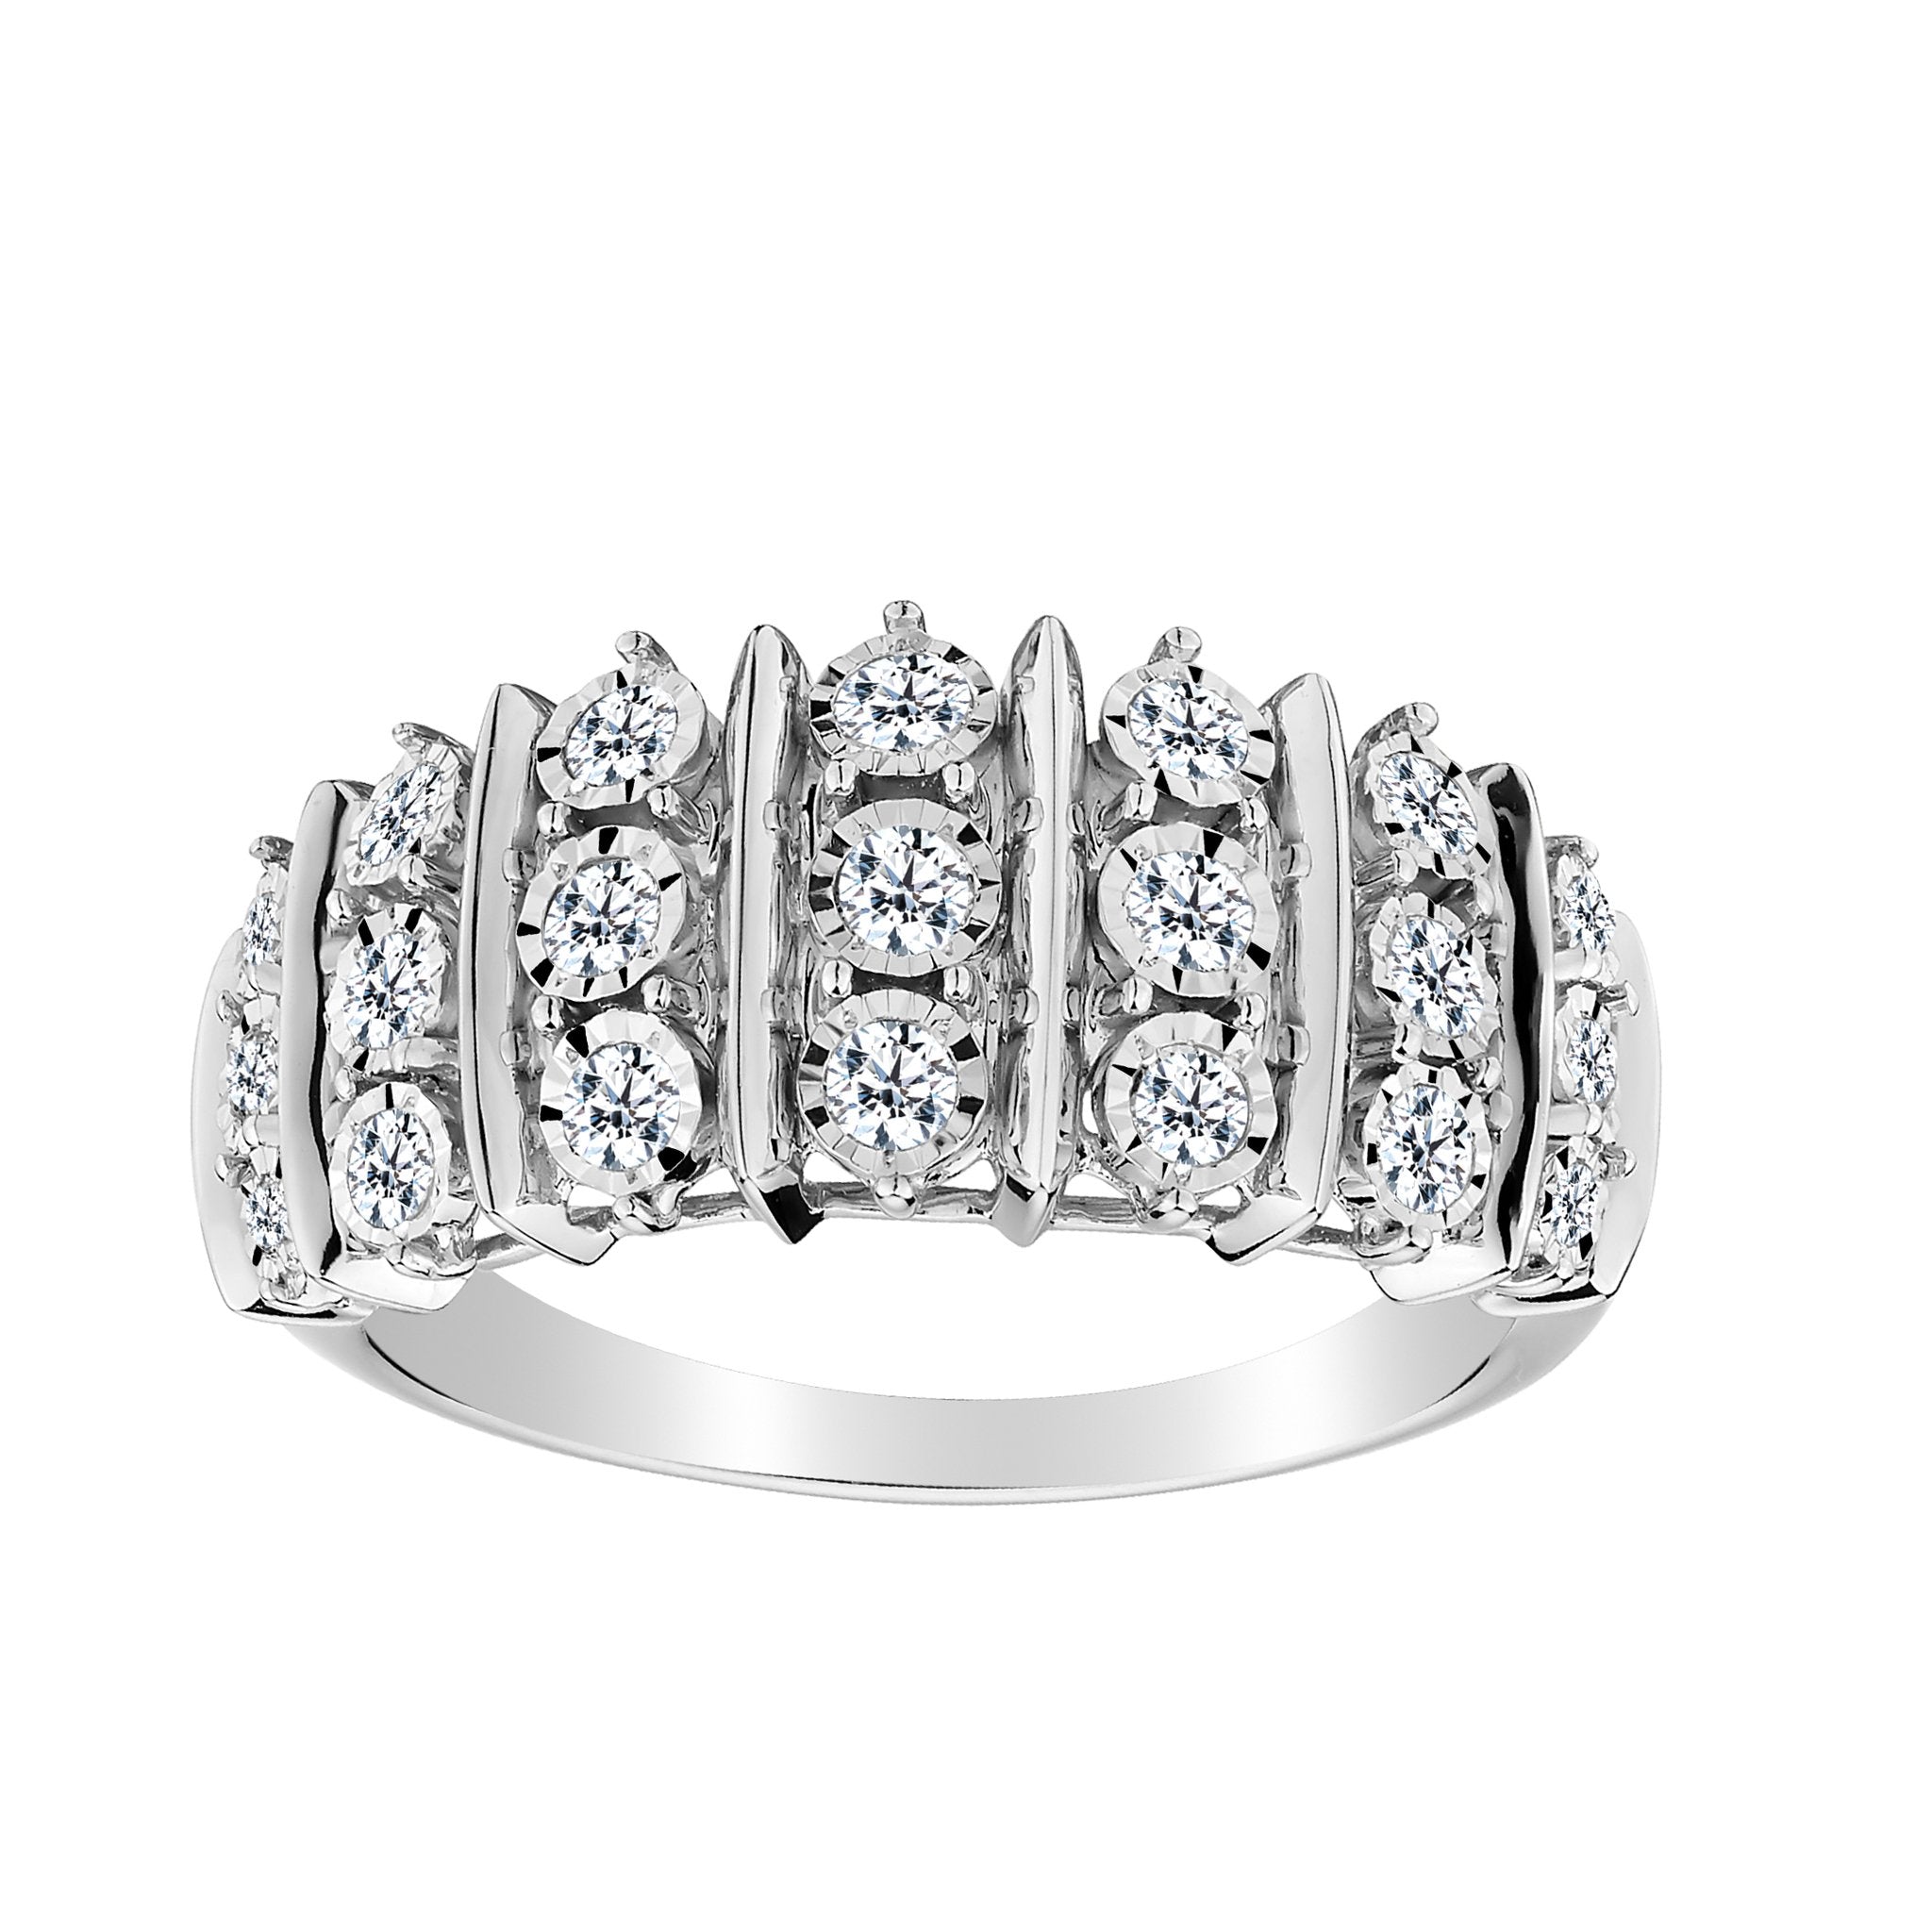 .50 CARAT DIAMOND "MIRACLE" RING, 10kt WHITE GOLD. Fashion Rings - Griffin Jewellery Designs